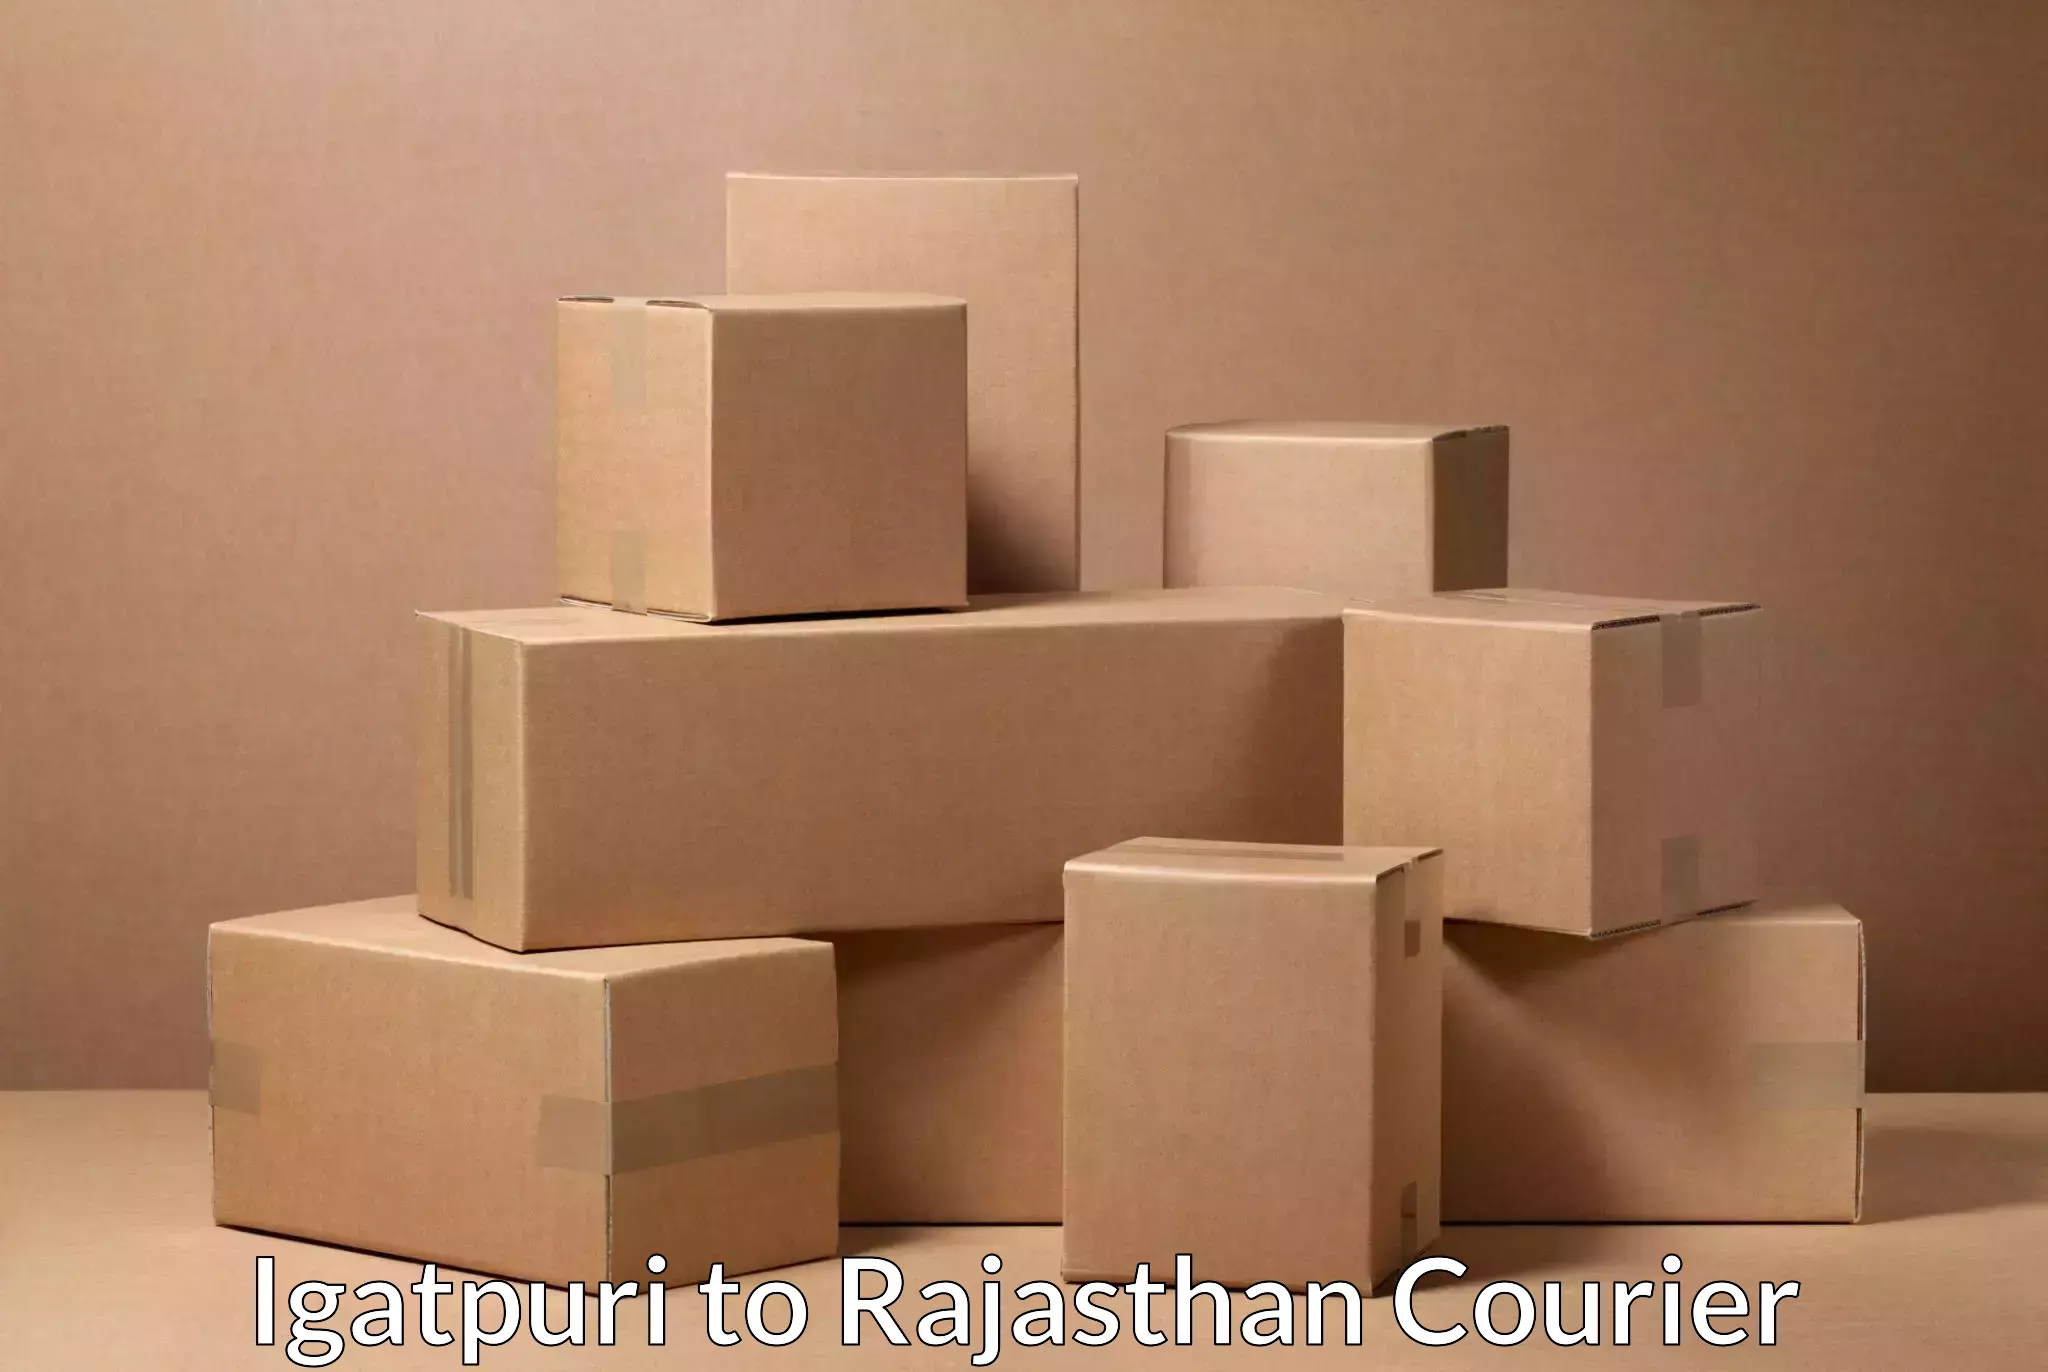 Next-day freight services in Igatpuri to Rajasthan